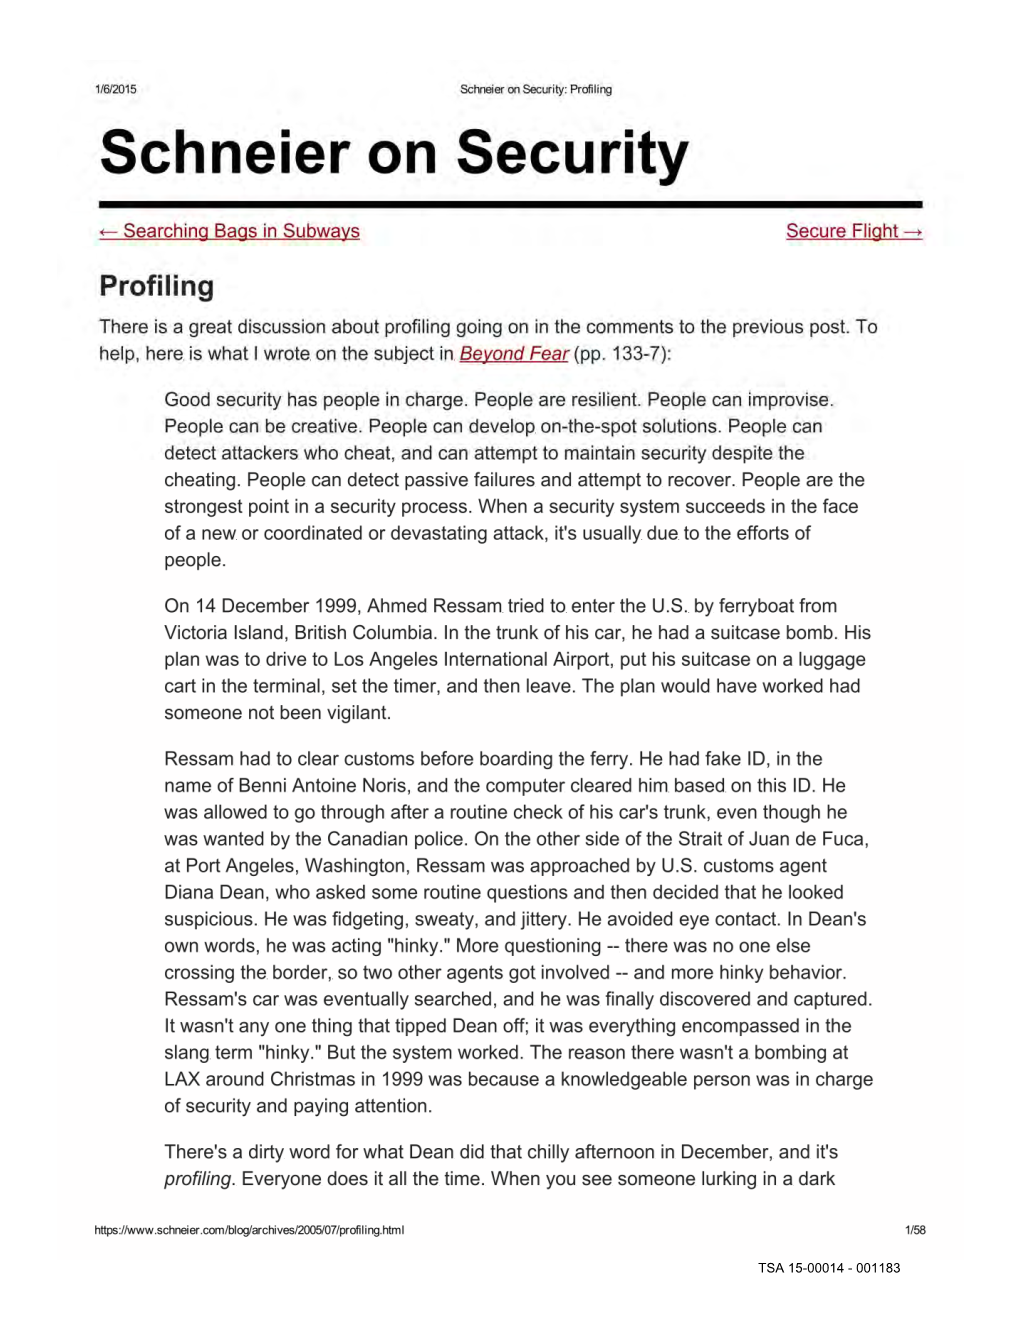 Profiling Schneier on Security